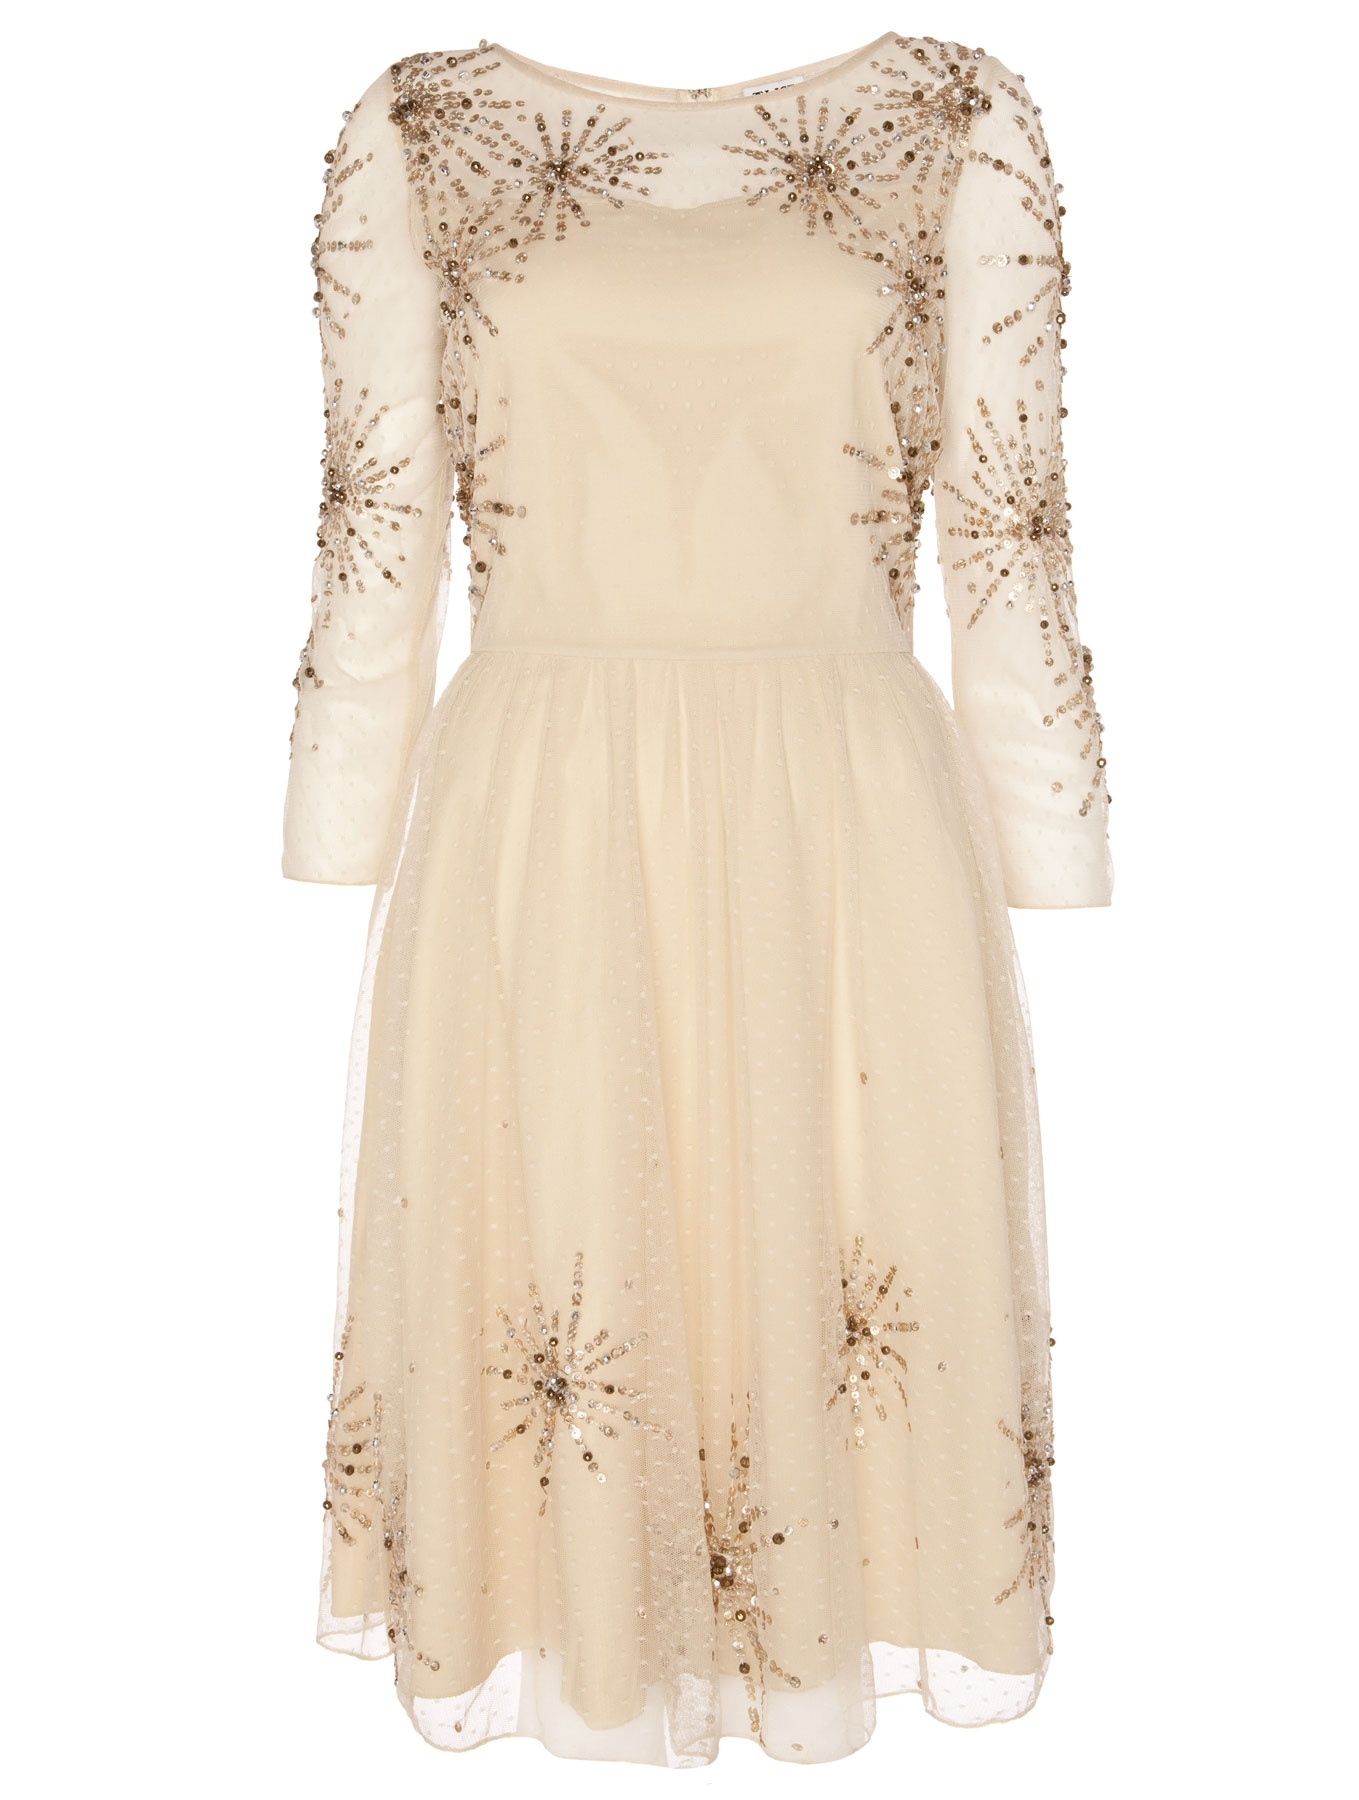 Lyst - Alice by temperley Balanchine Dress in White